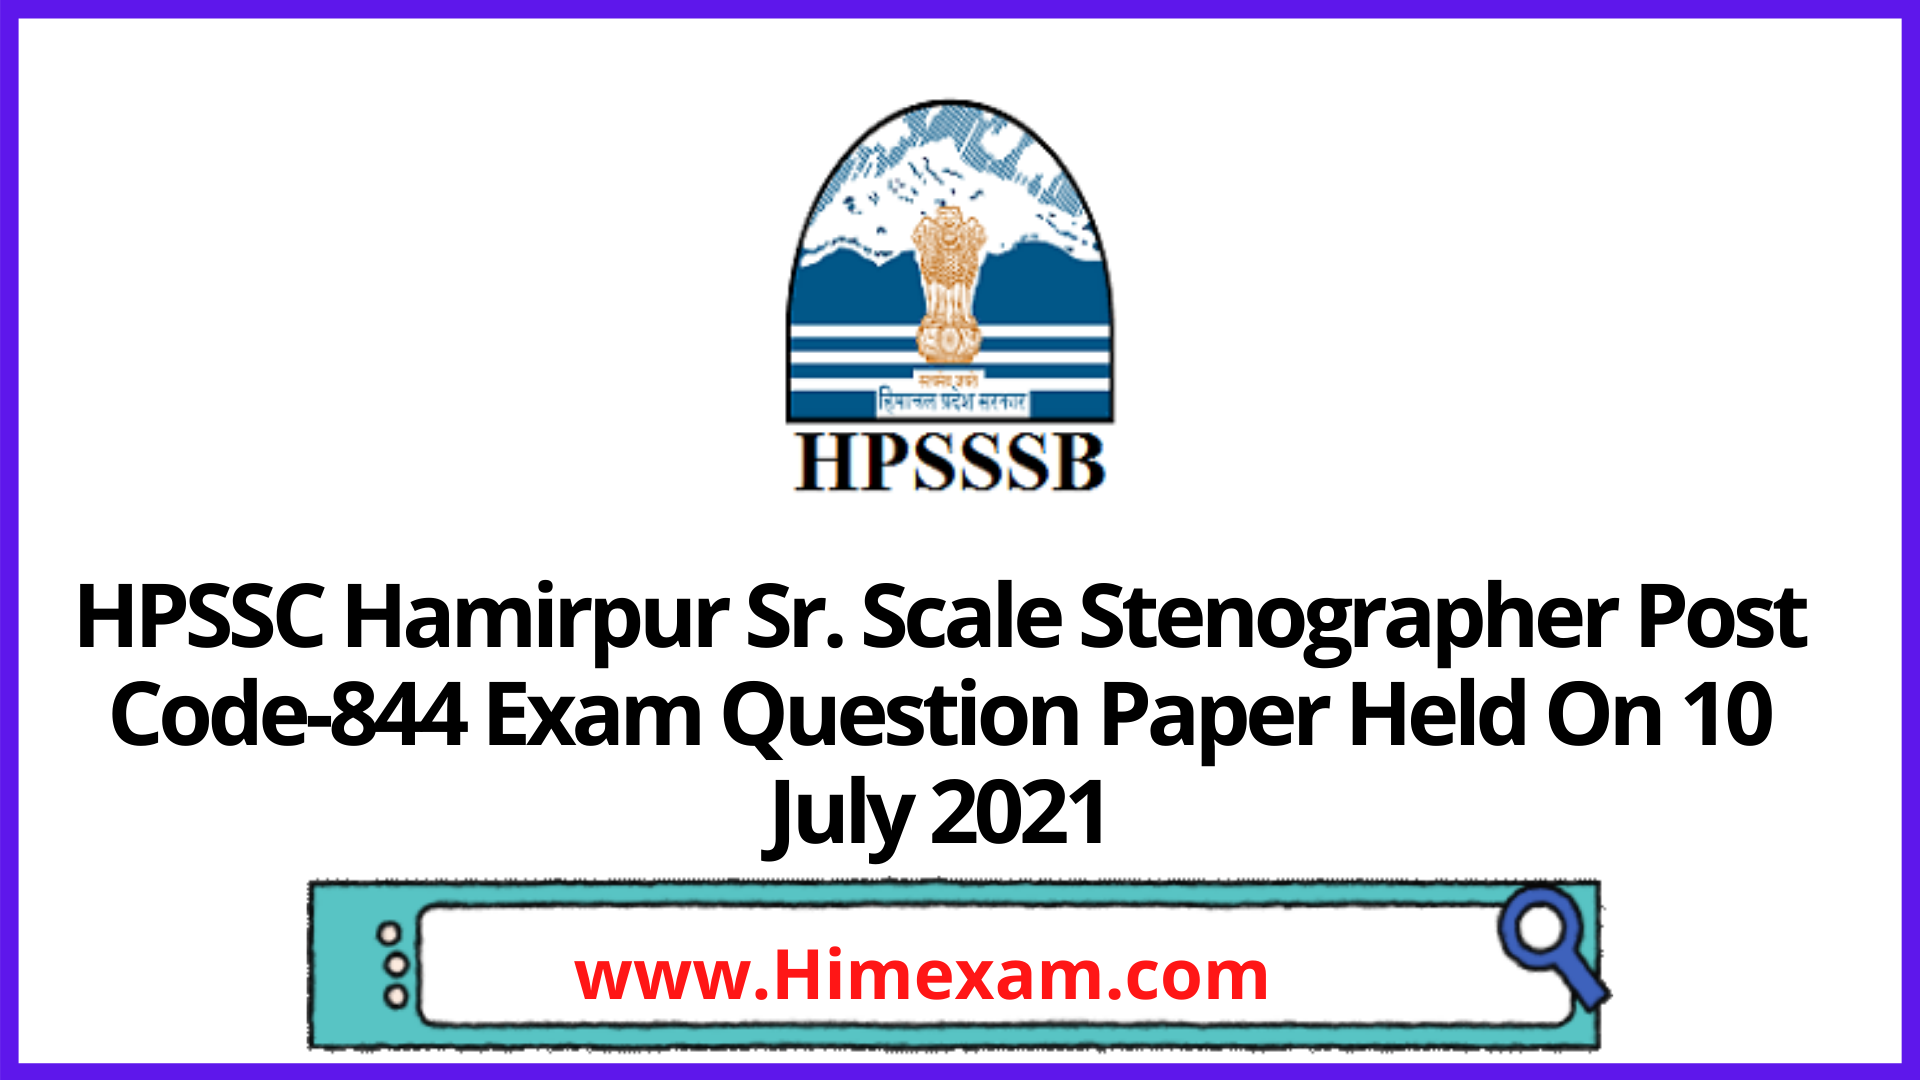 HPSSC Hamirpur Sr. Scale Stenographer Post Code-844 Exam Question Paper Held On 10 July 2021